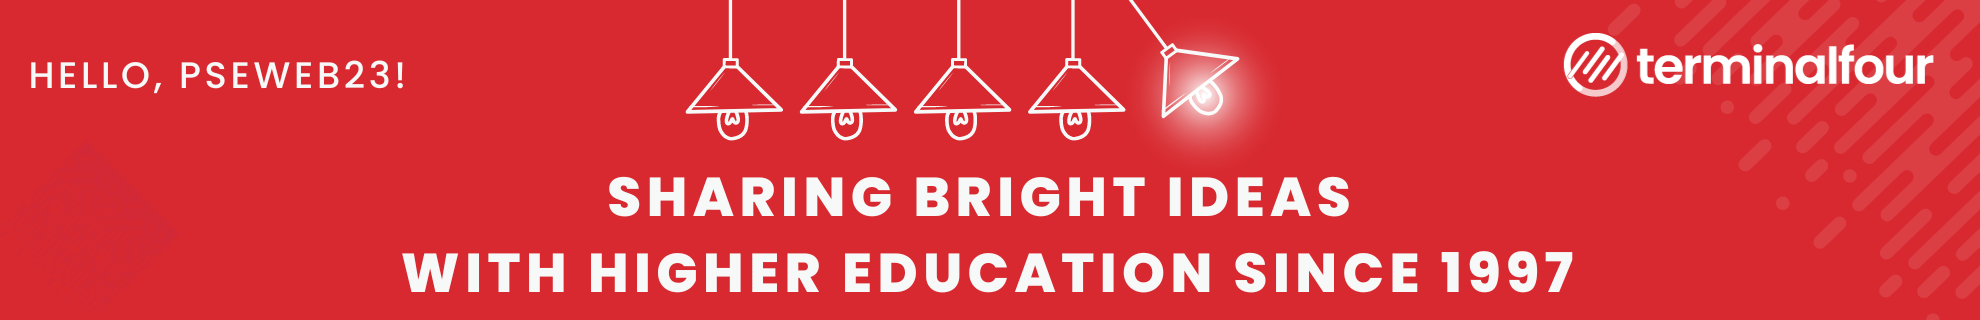 Banner graphic shows a row of five hanging lamps, one is swinging to the right and glowing as if turned on. The text reads, Hello, PSEWEB23! Terminalfour. Sharing Bright Ideas with higher education since 1997.